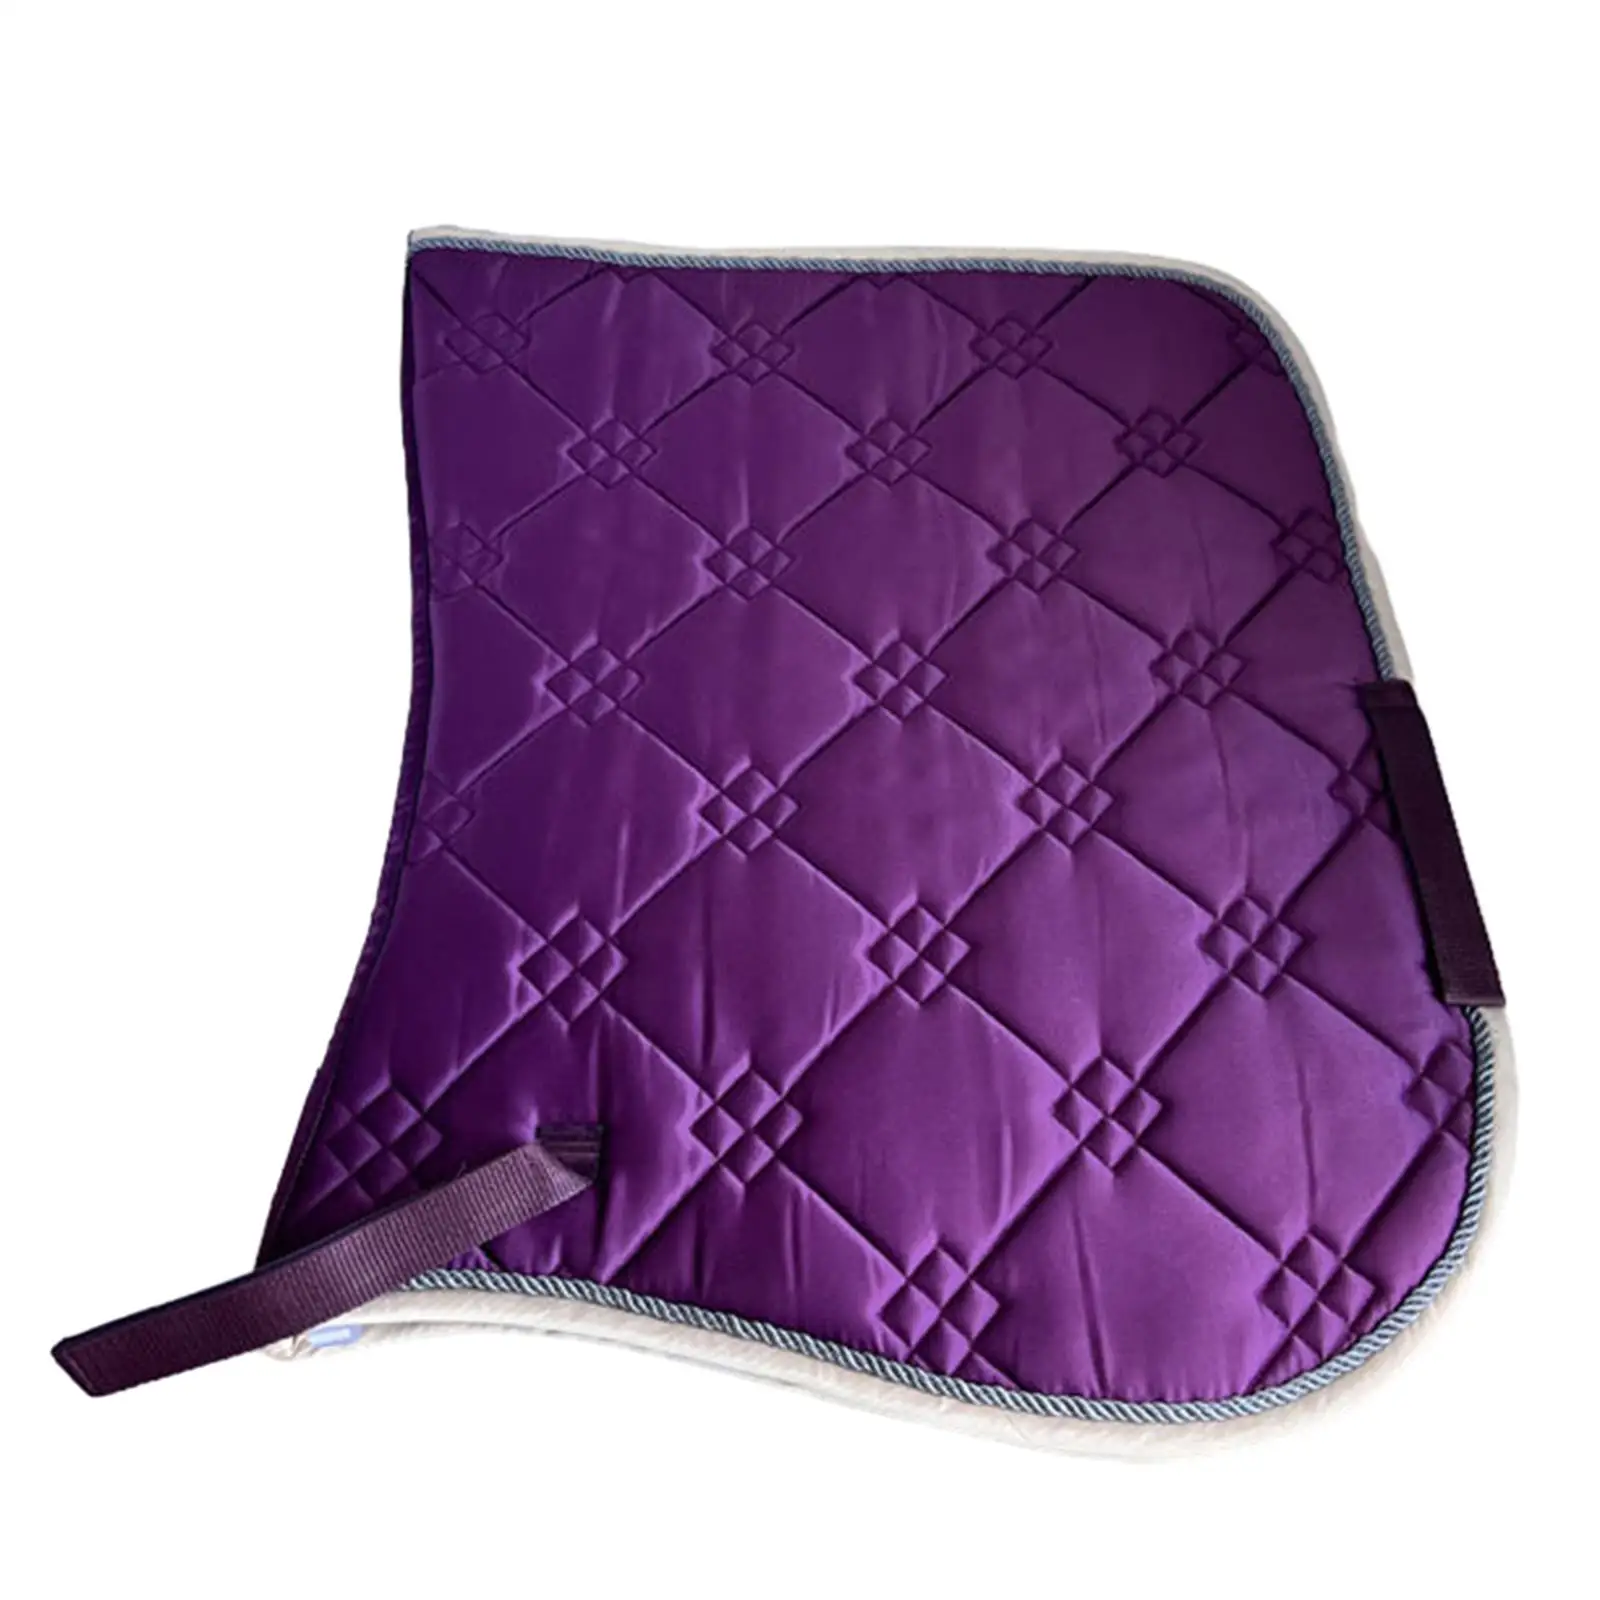 Saddle Pad for Horse Durable Thickening Sports Sponge Lining Dressage Pad